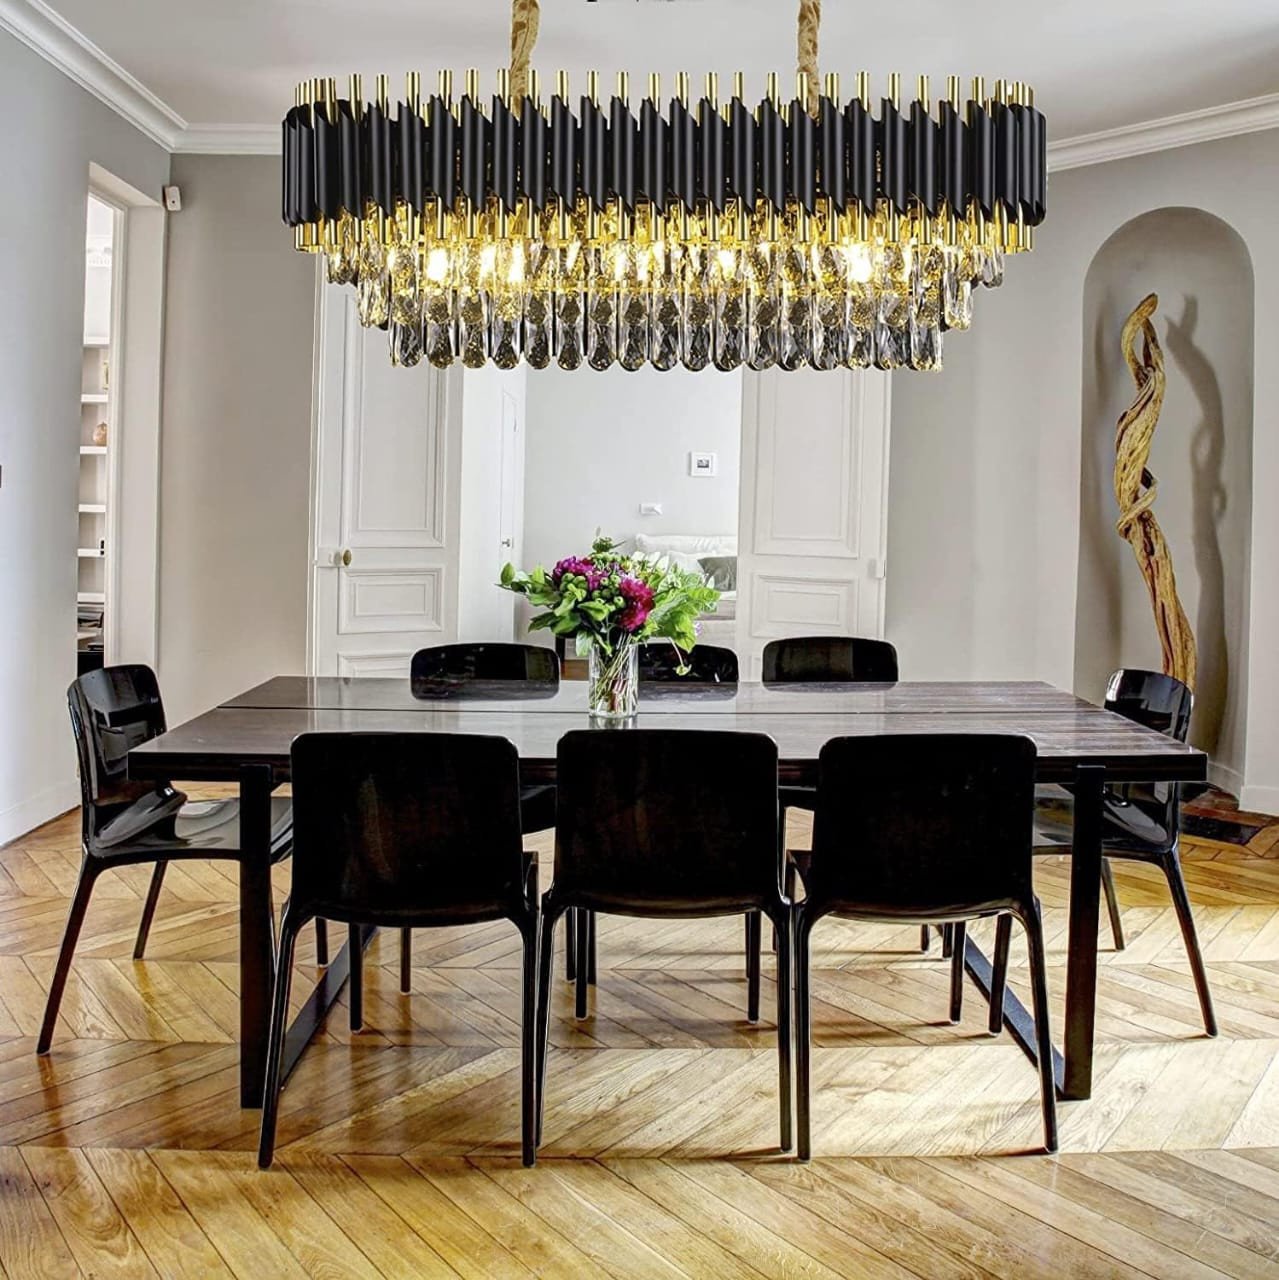 FLOSTON Modern Crystal Chandeliers Black Gold K9 Crystal 3 Tier Round Oval Crystal Chandelier Ceiling Light Fixture for Living Room and Hallway 600x300